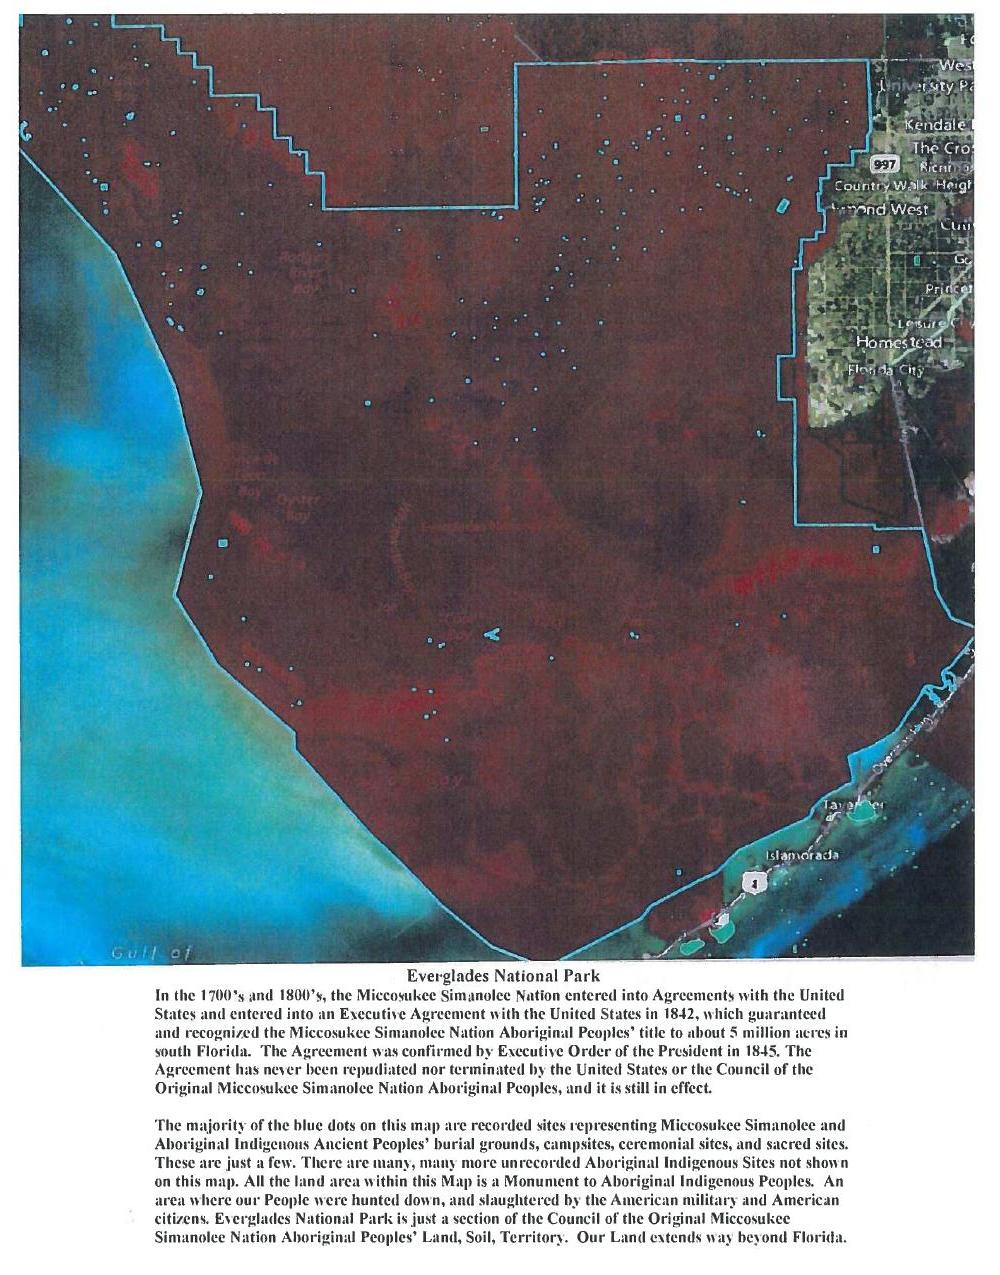 1000x1275 Everglades National Park, in Council of the Original Miccosukee Simanolee Nation, by John S. Quarterman, for SpectraBusters.org, 21 November 2013